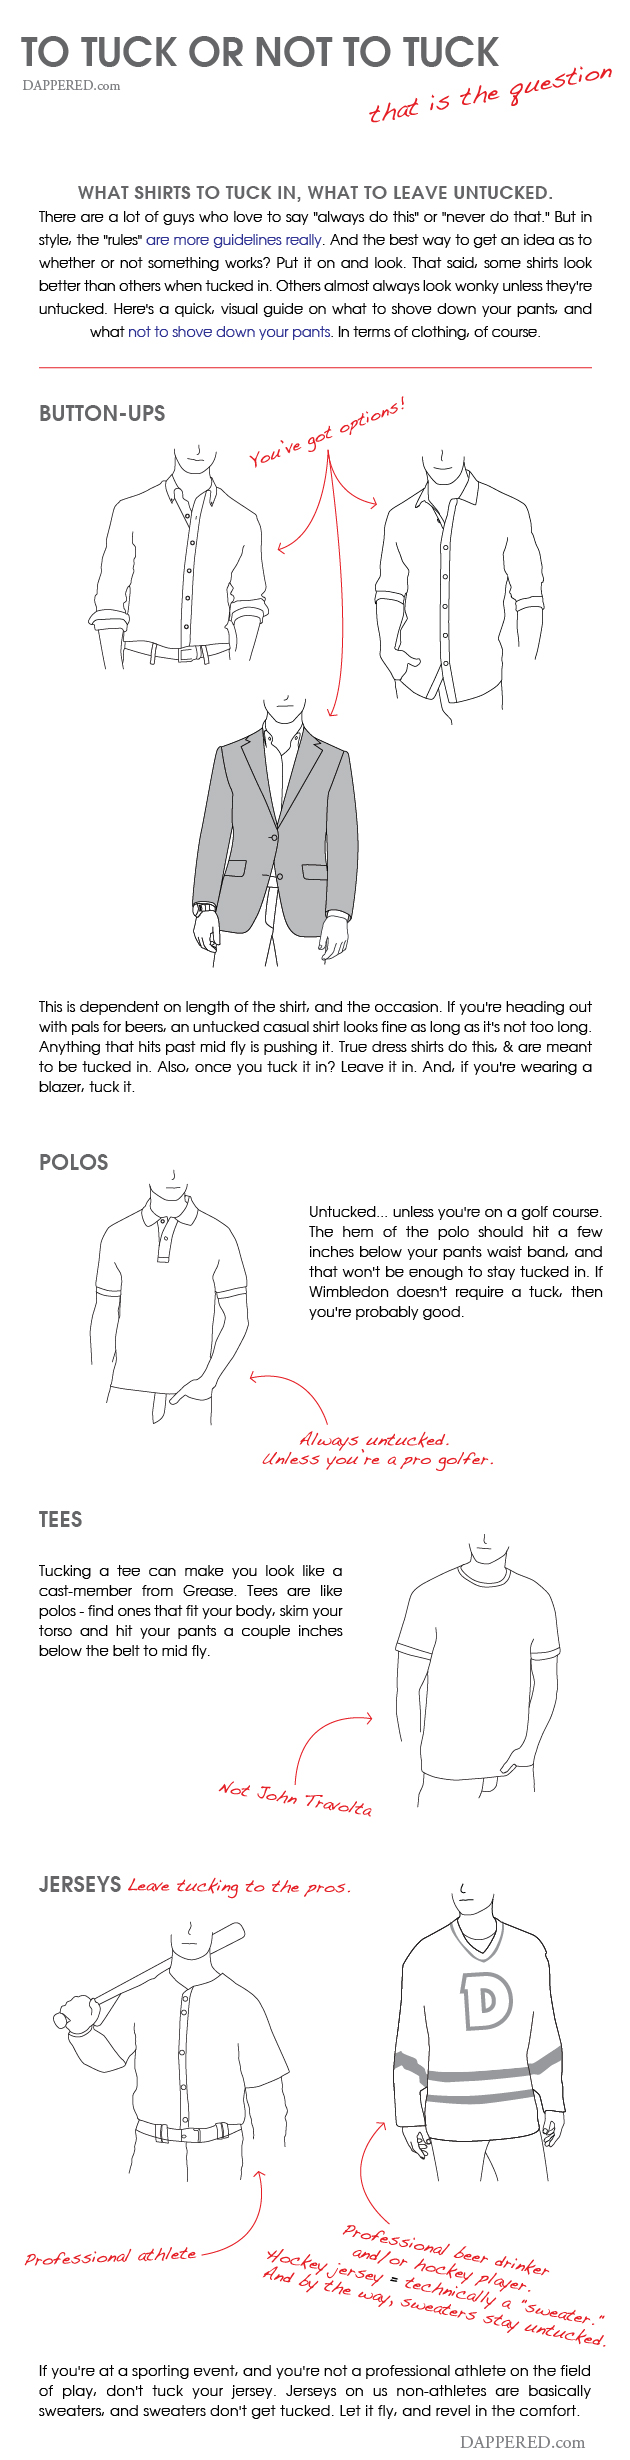 To Tuck or Not to Tuck - An Illustrated Guide | Dappered.com